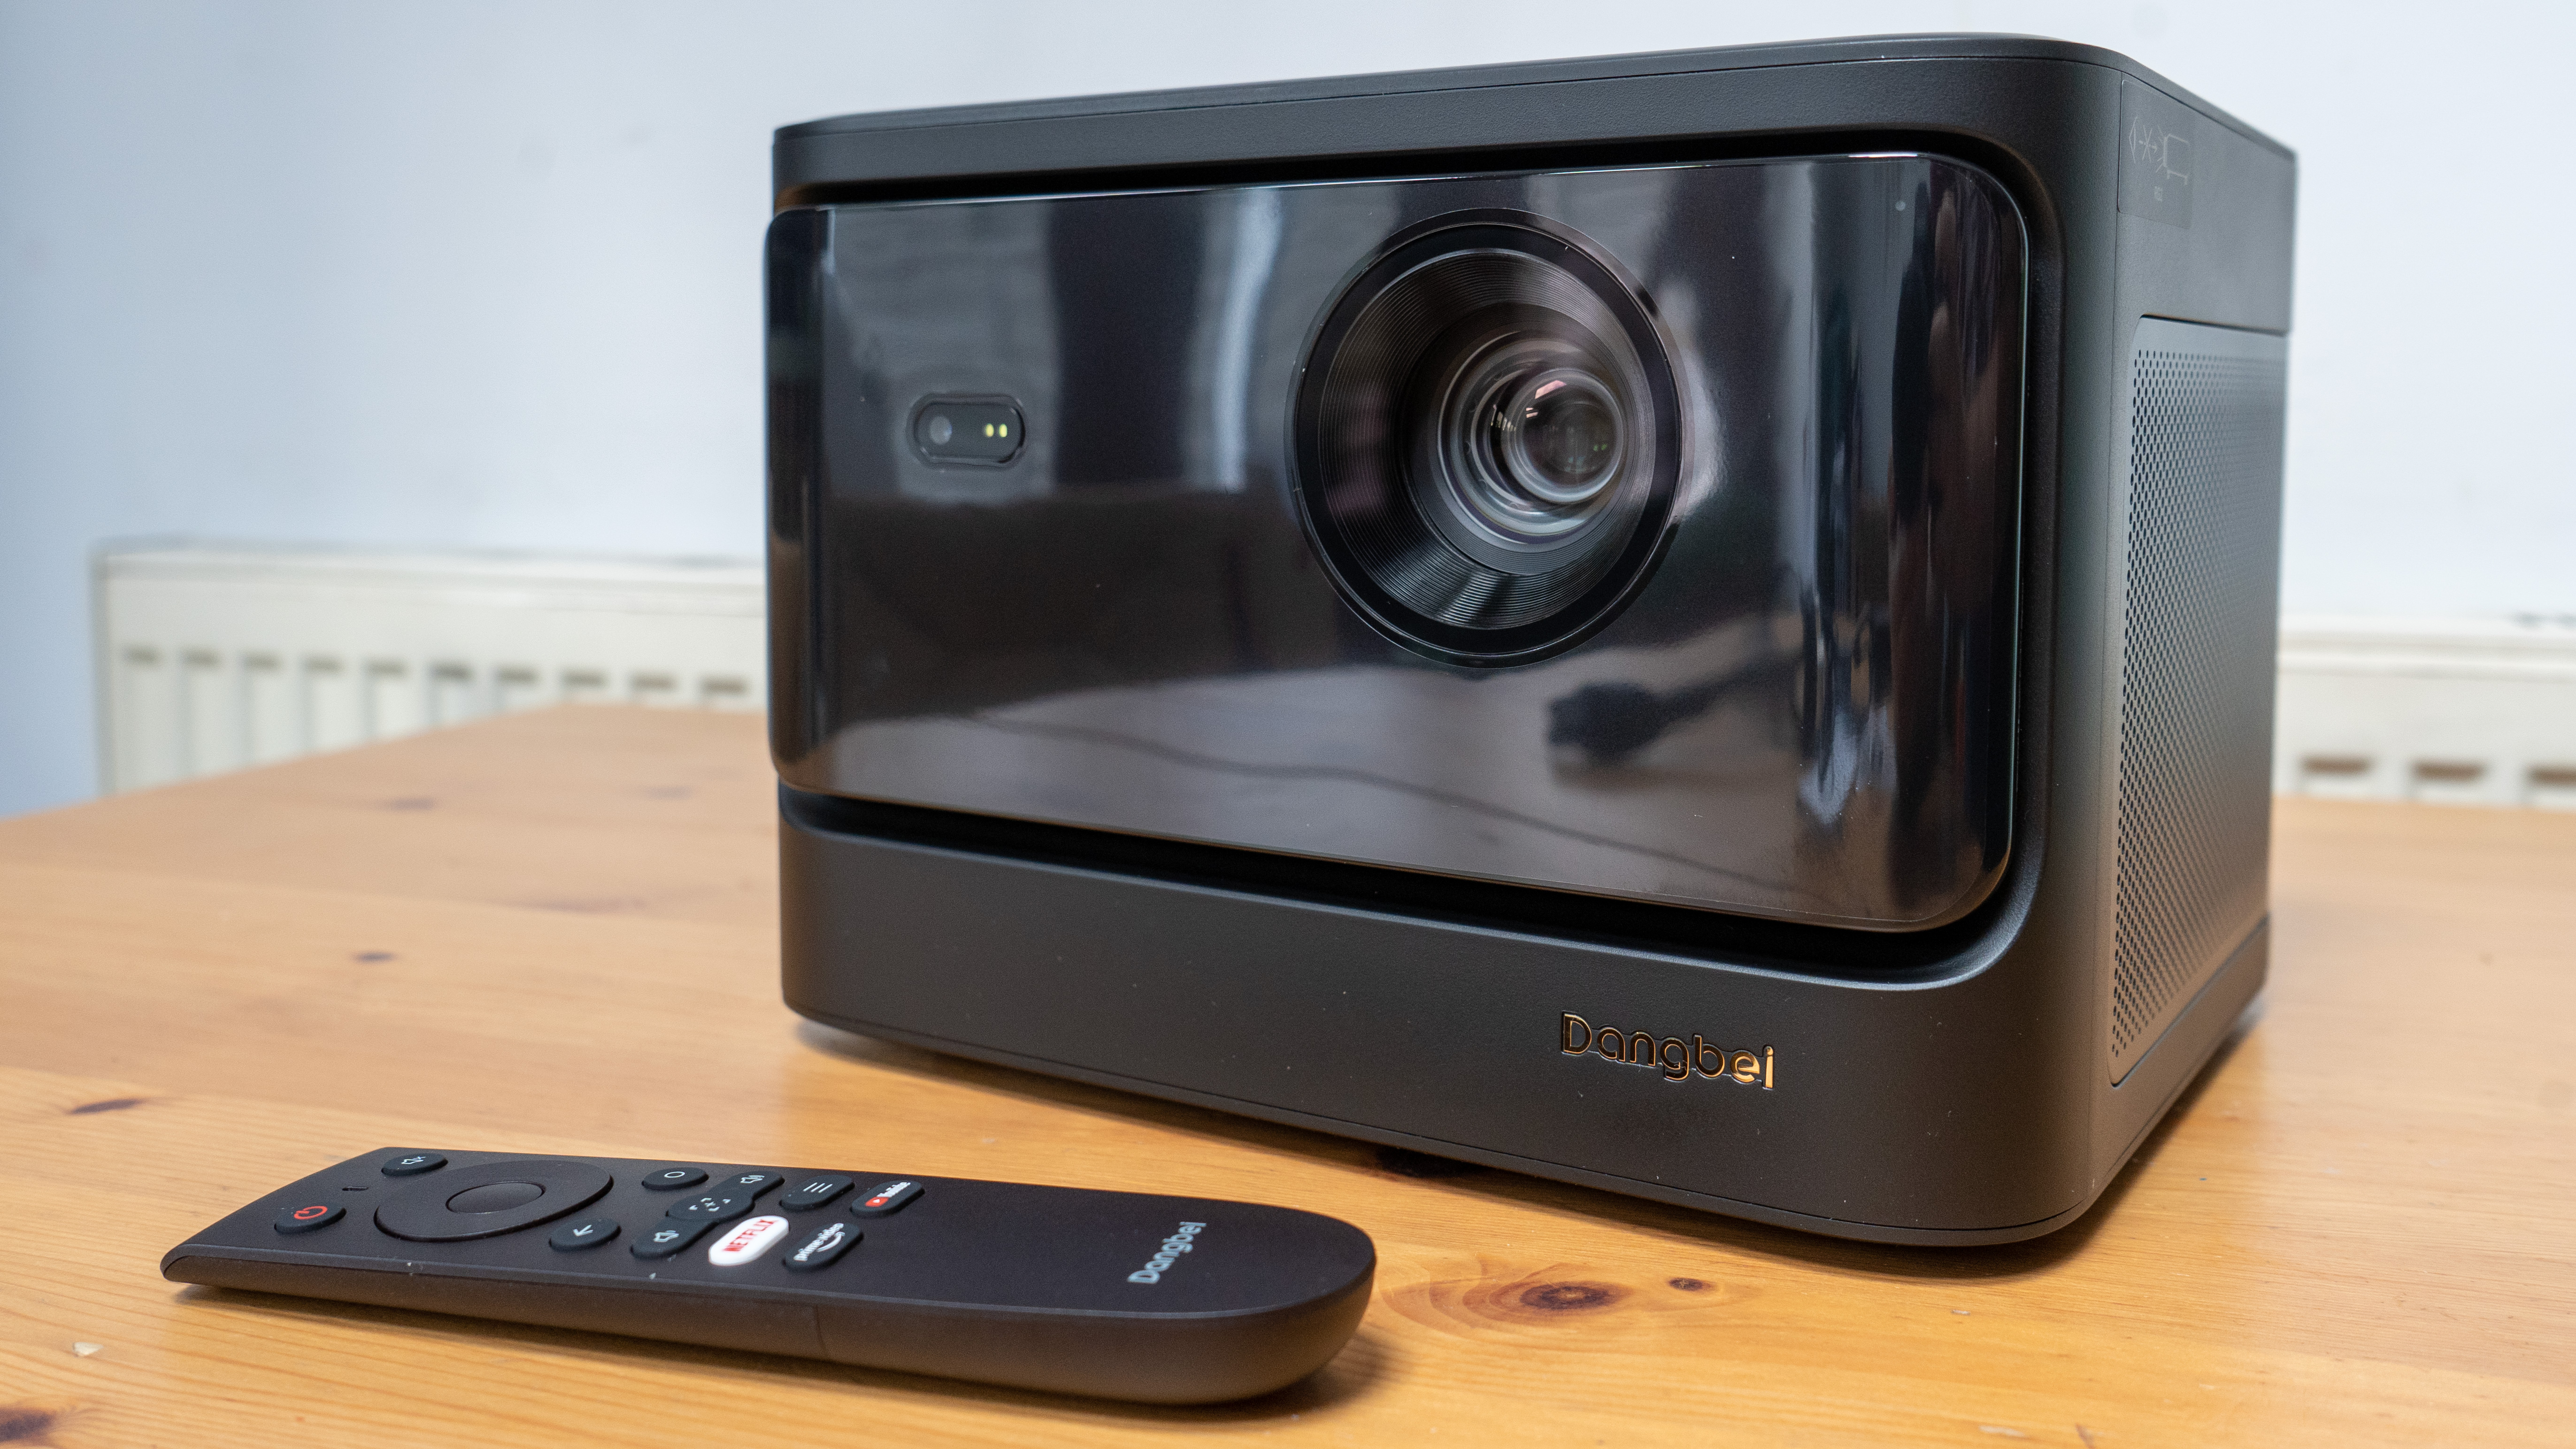 Dangbei Mars Pro 4K Projector Review